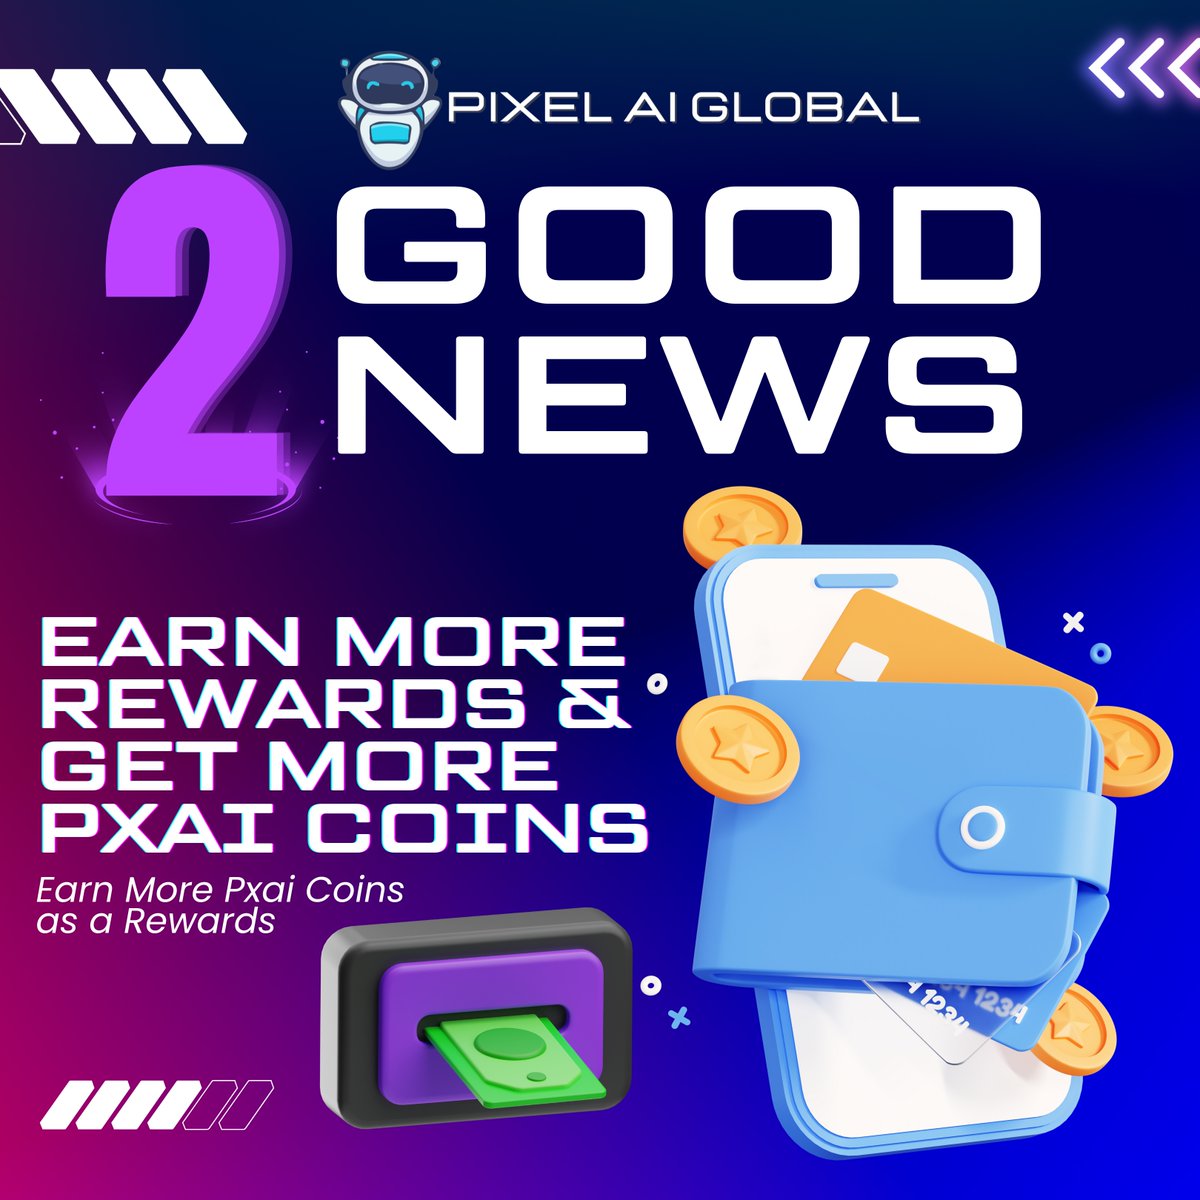 🚀Earn more PXAI coins with PixelAi Global's new opportunity!
Don't miss out on this exciting chance to boost your rewards.
Stay tuned for further details and start boosting your PXAI coin balance today! 💰✨ #PXAI #EarnMore #OpportunityKnocks
#PixelAiGlobal #Rewards #Opportunity